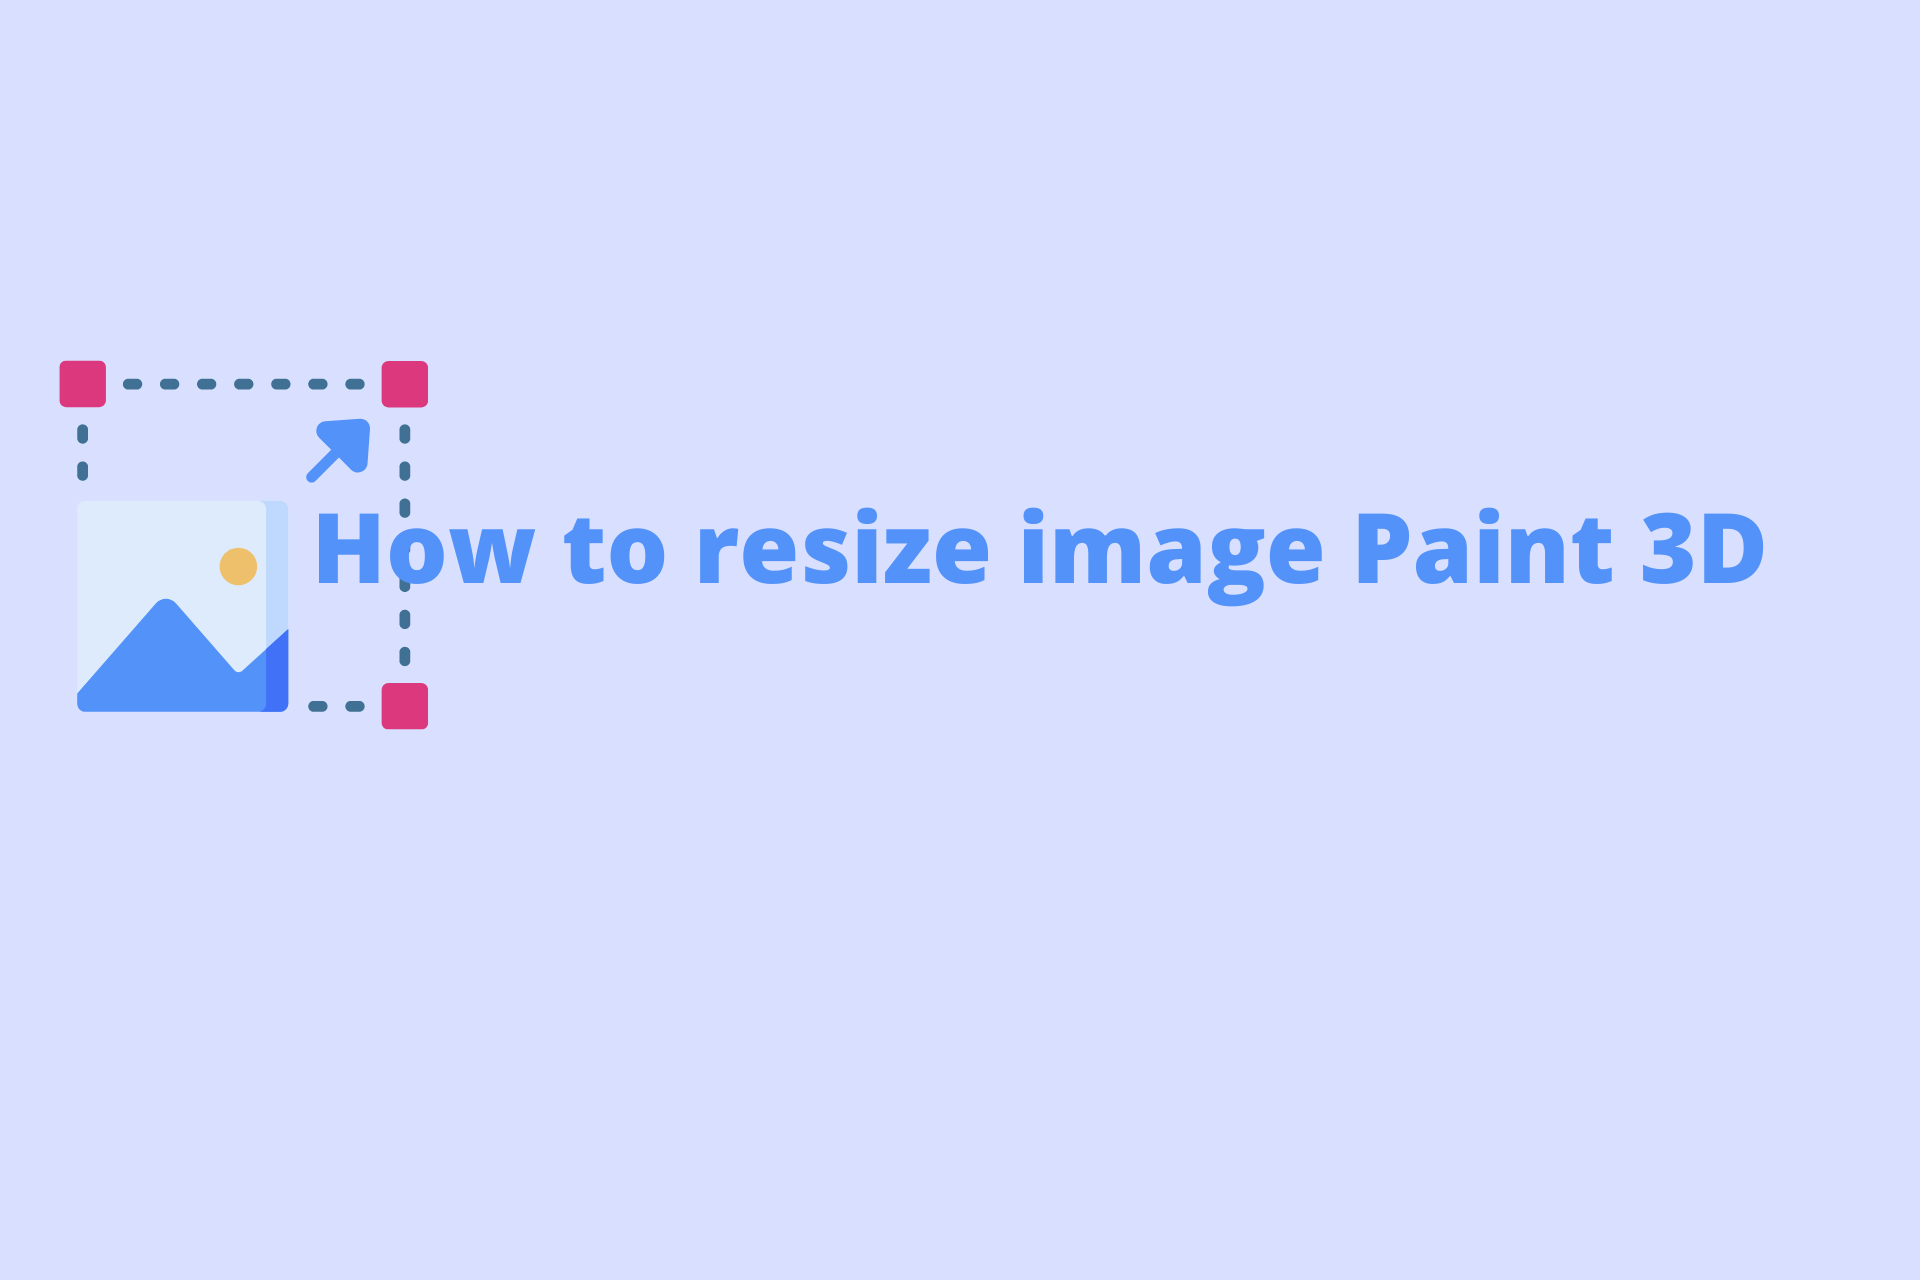 How to resize image Paint 3D